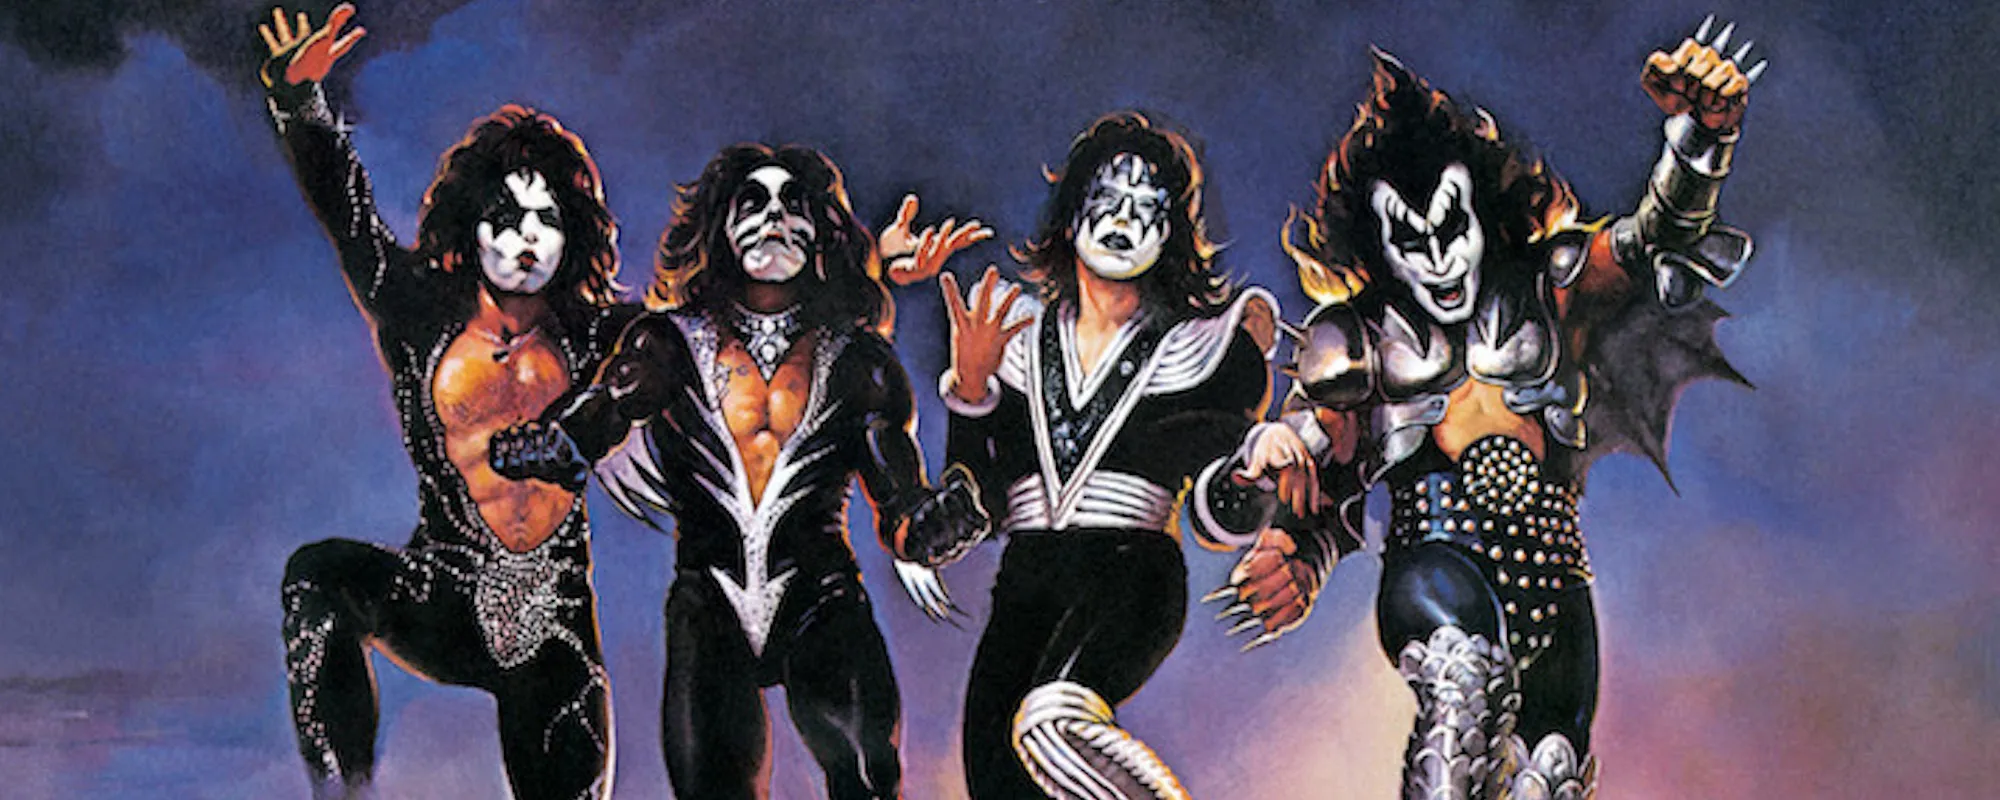 Behind the Meaning of the Band Name: KISS